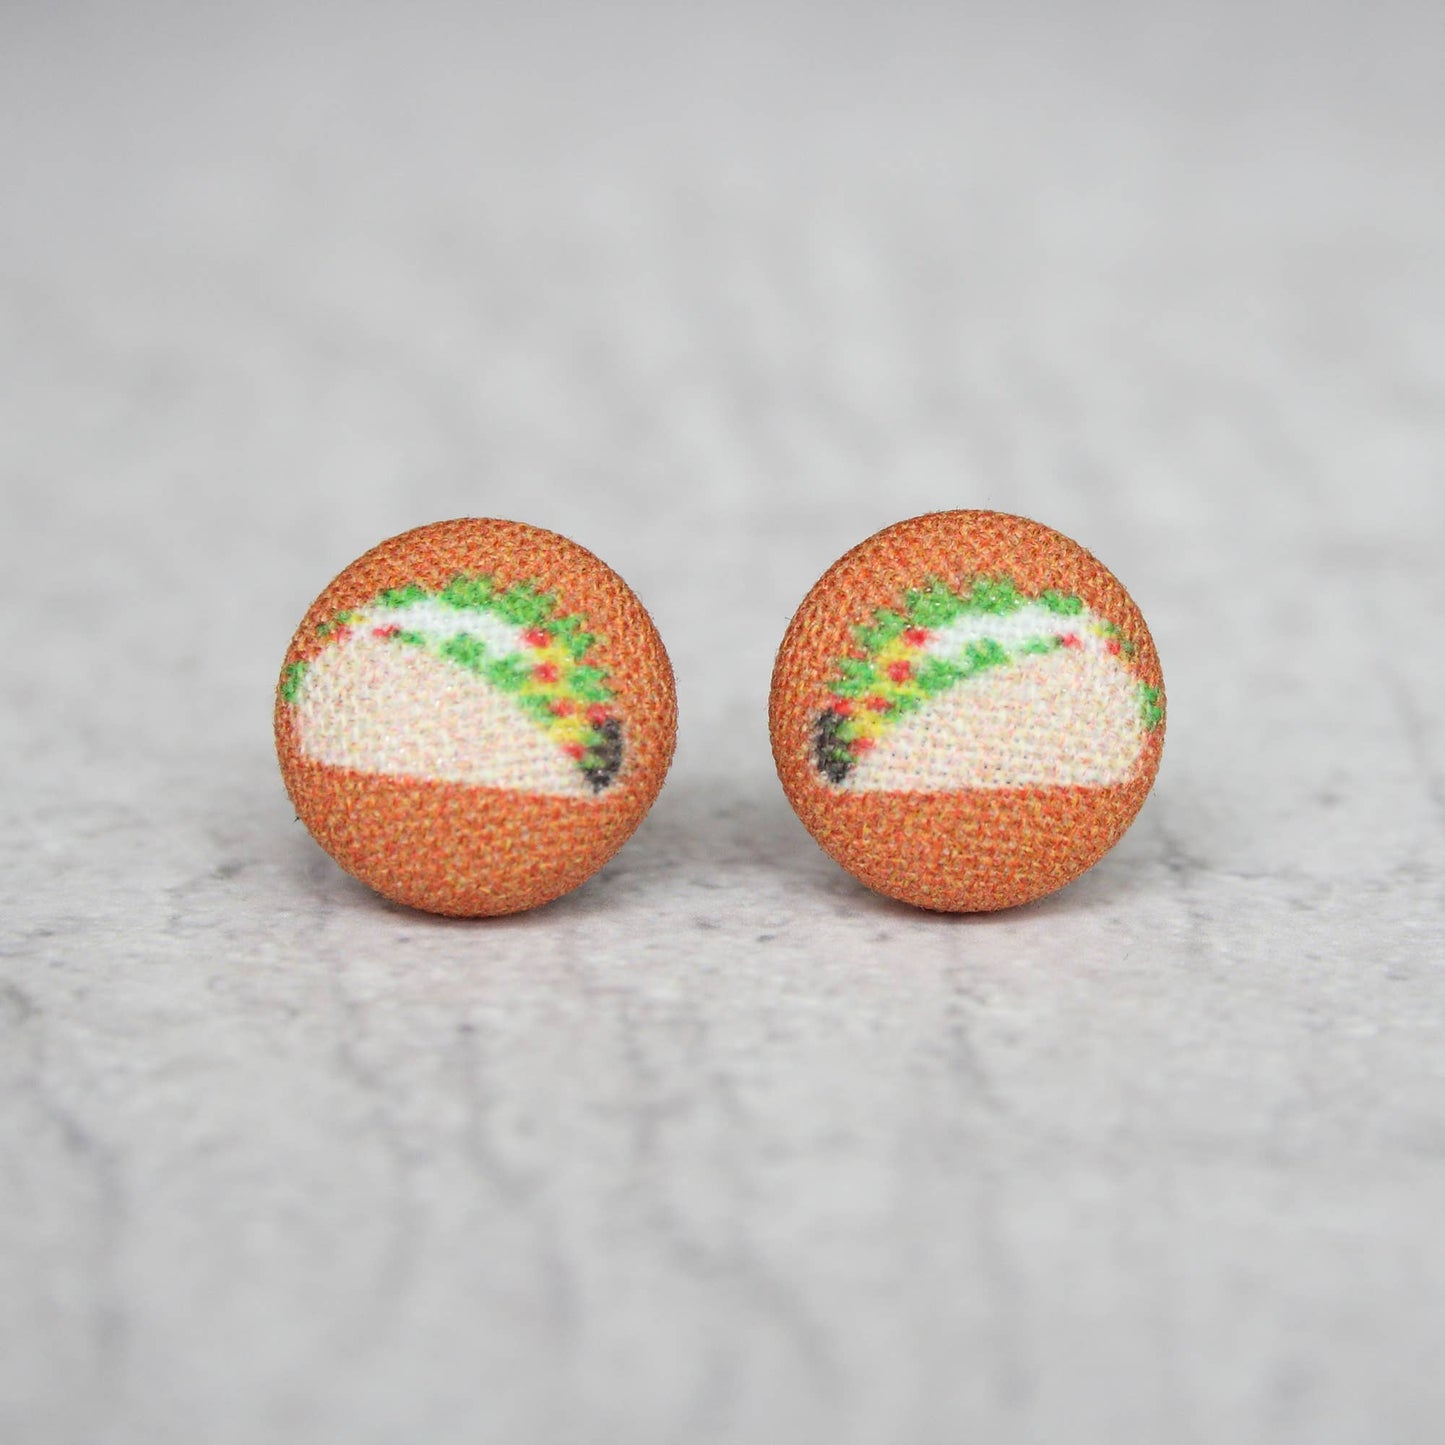 Taco (small) Fabric button Stud EarringsPink tiful of LOVE